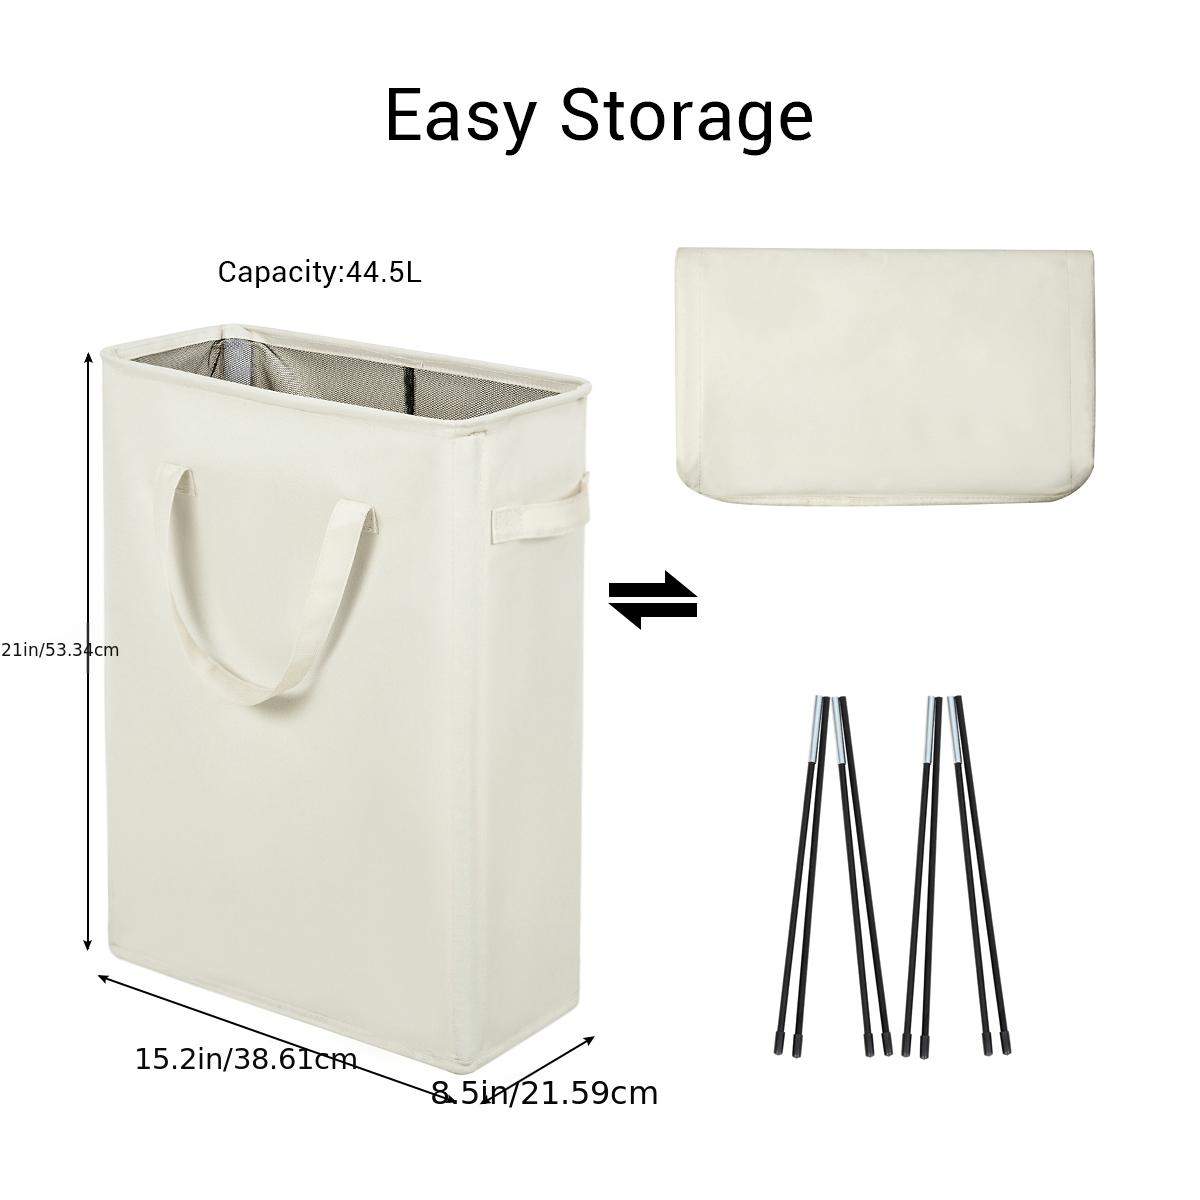 1pc Plastic Collapsible Laundry Basket, 31L(8 Gallon) Foldable Portable Laundry  Hamper With Handles, Pop-up Storage Container/Organizer For Laundry,  Household Item